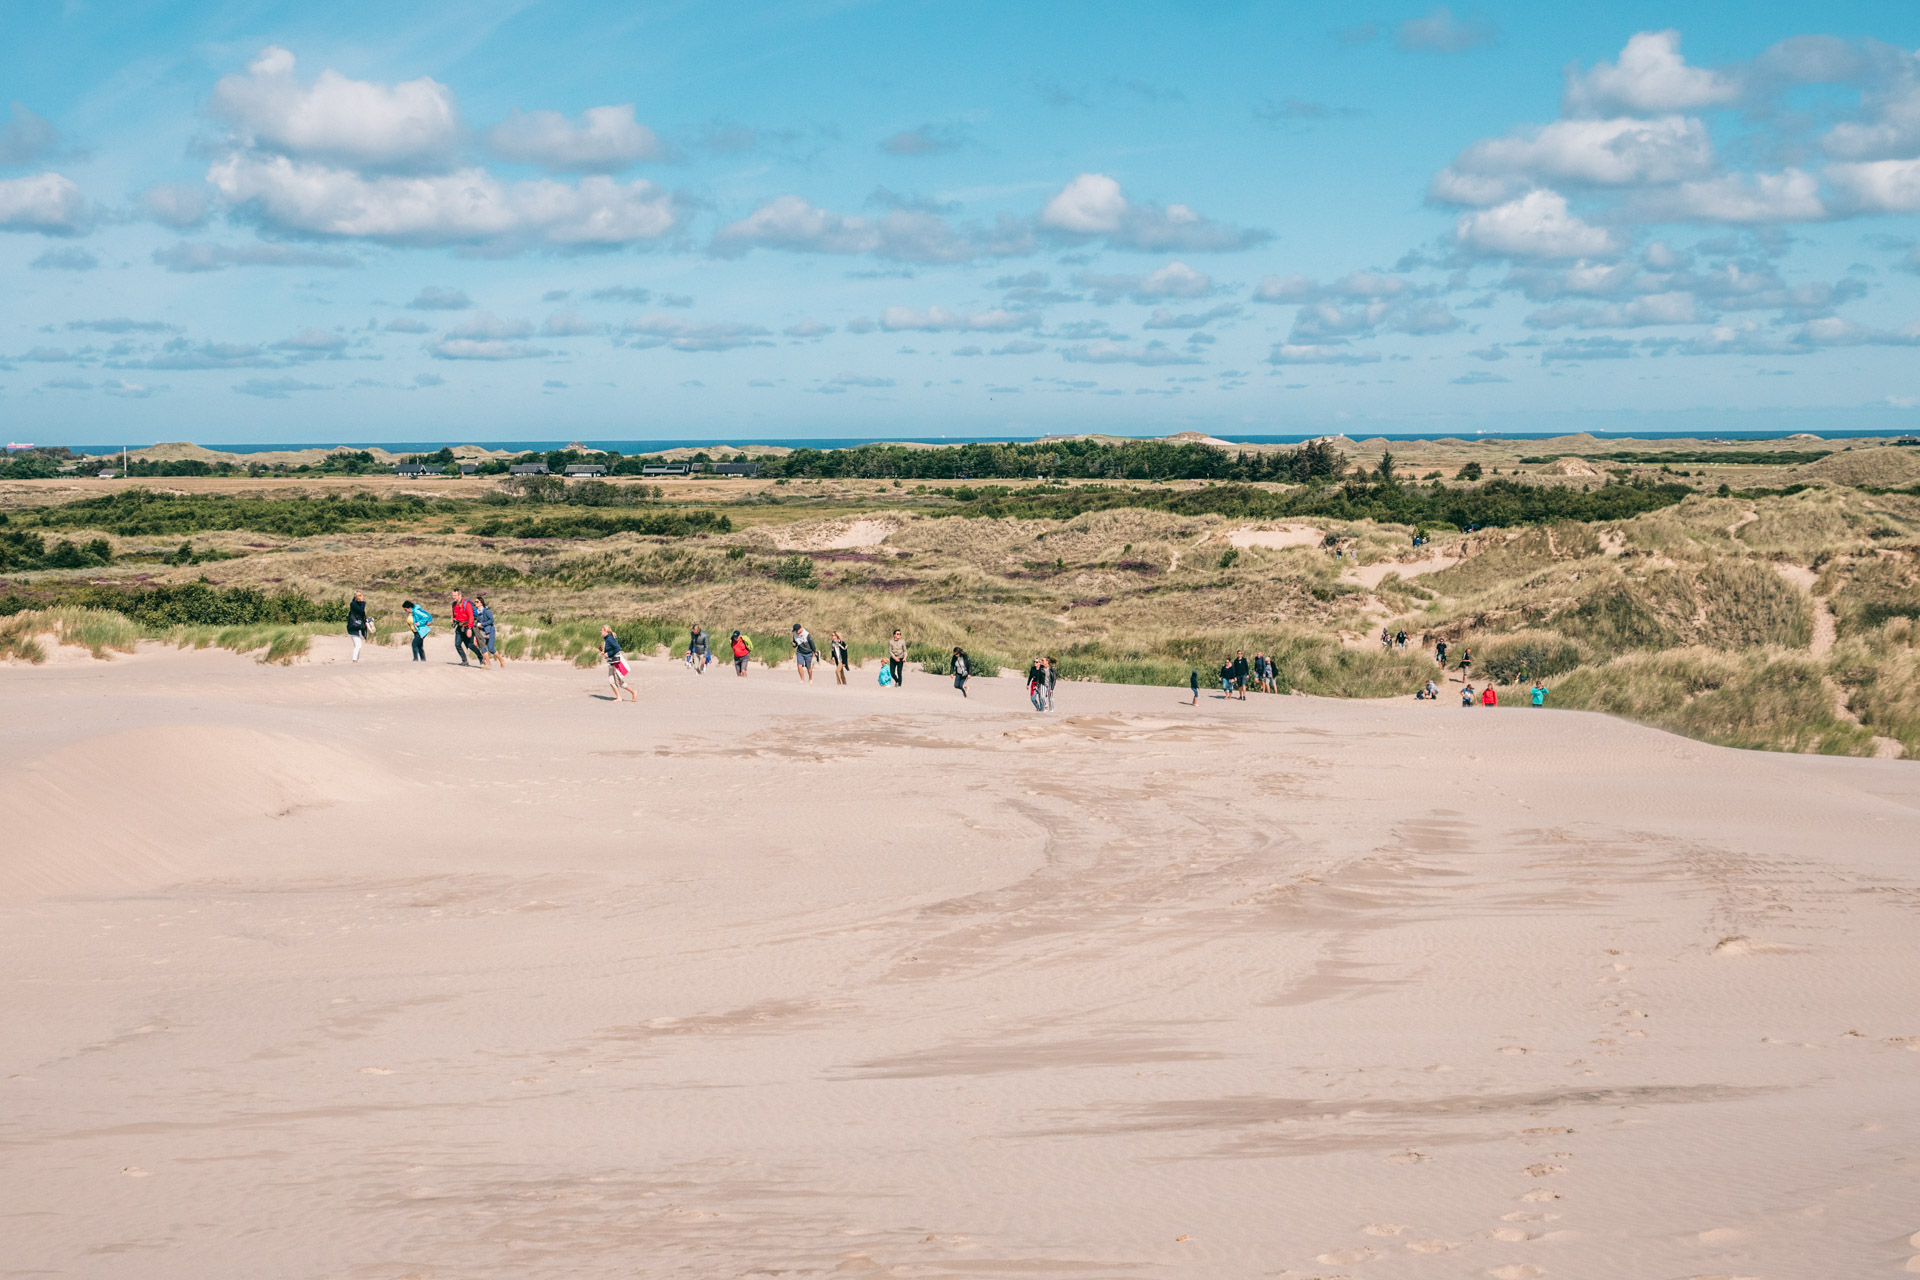 Råbjerg Mile in Skagen: Travel Guide to the Largest Migrating Dune in Northern Europe